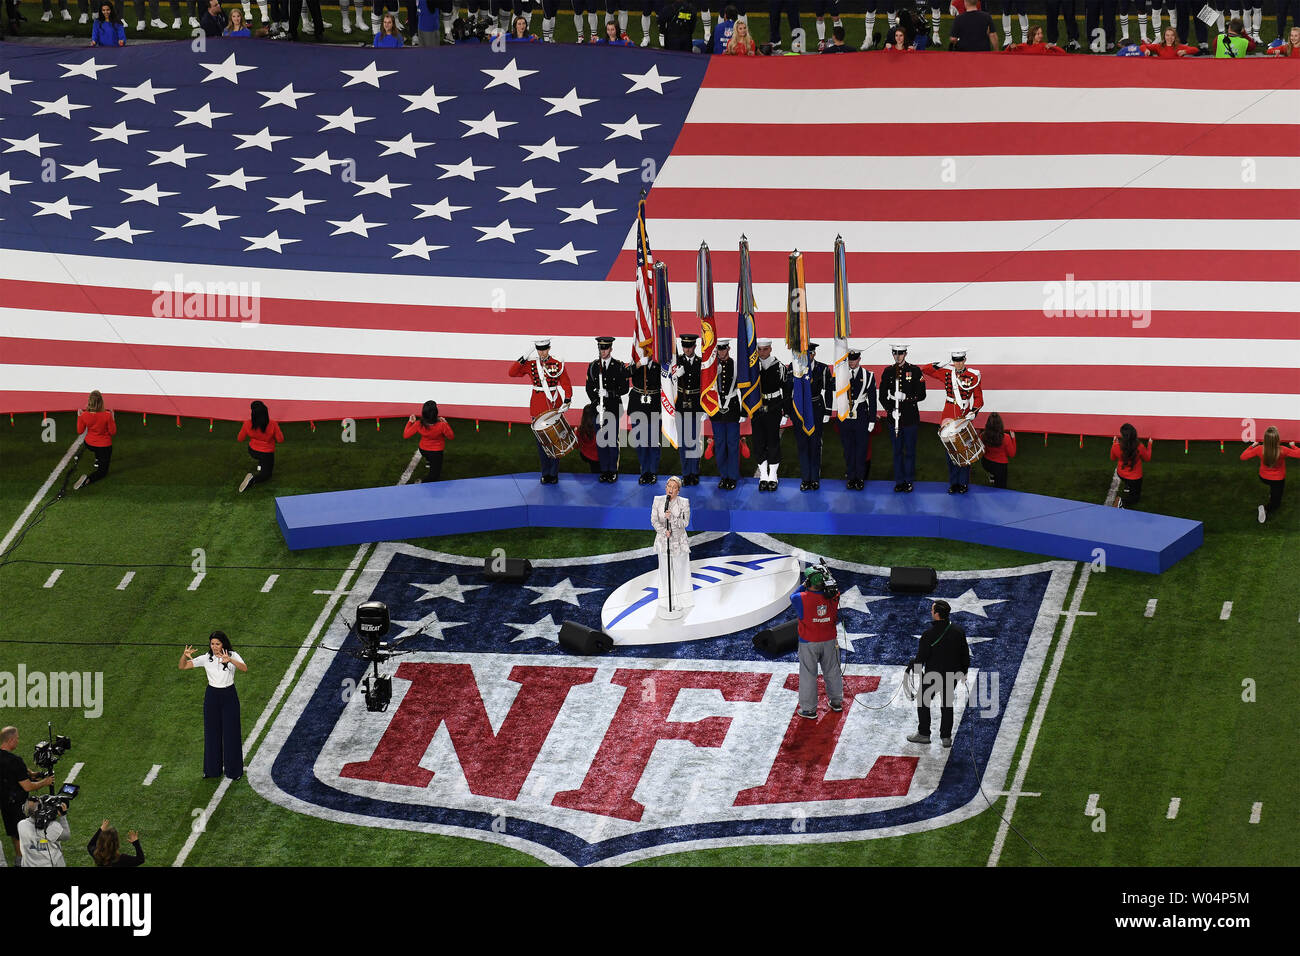 Pink sings the national anthem at Super Bowl LII at U.S. Bank Stadium in  Minneapolis, Minnesota on February 4, 2018. The Eagles will be seeking  their first title while the Patriots will